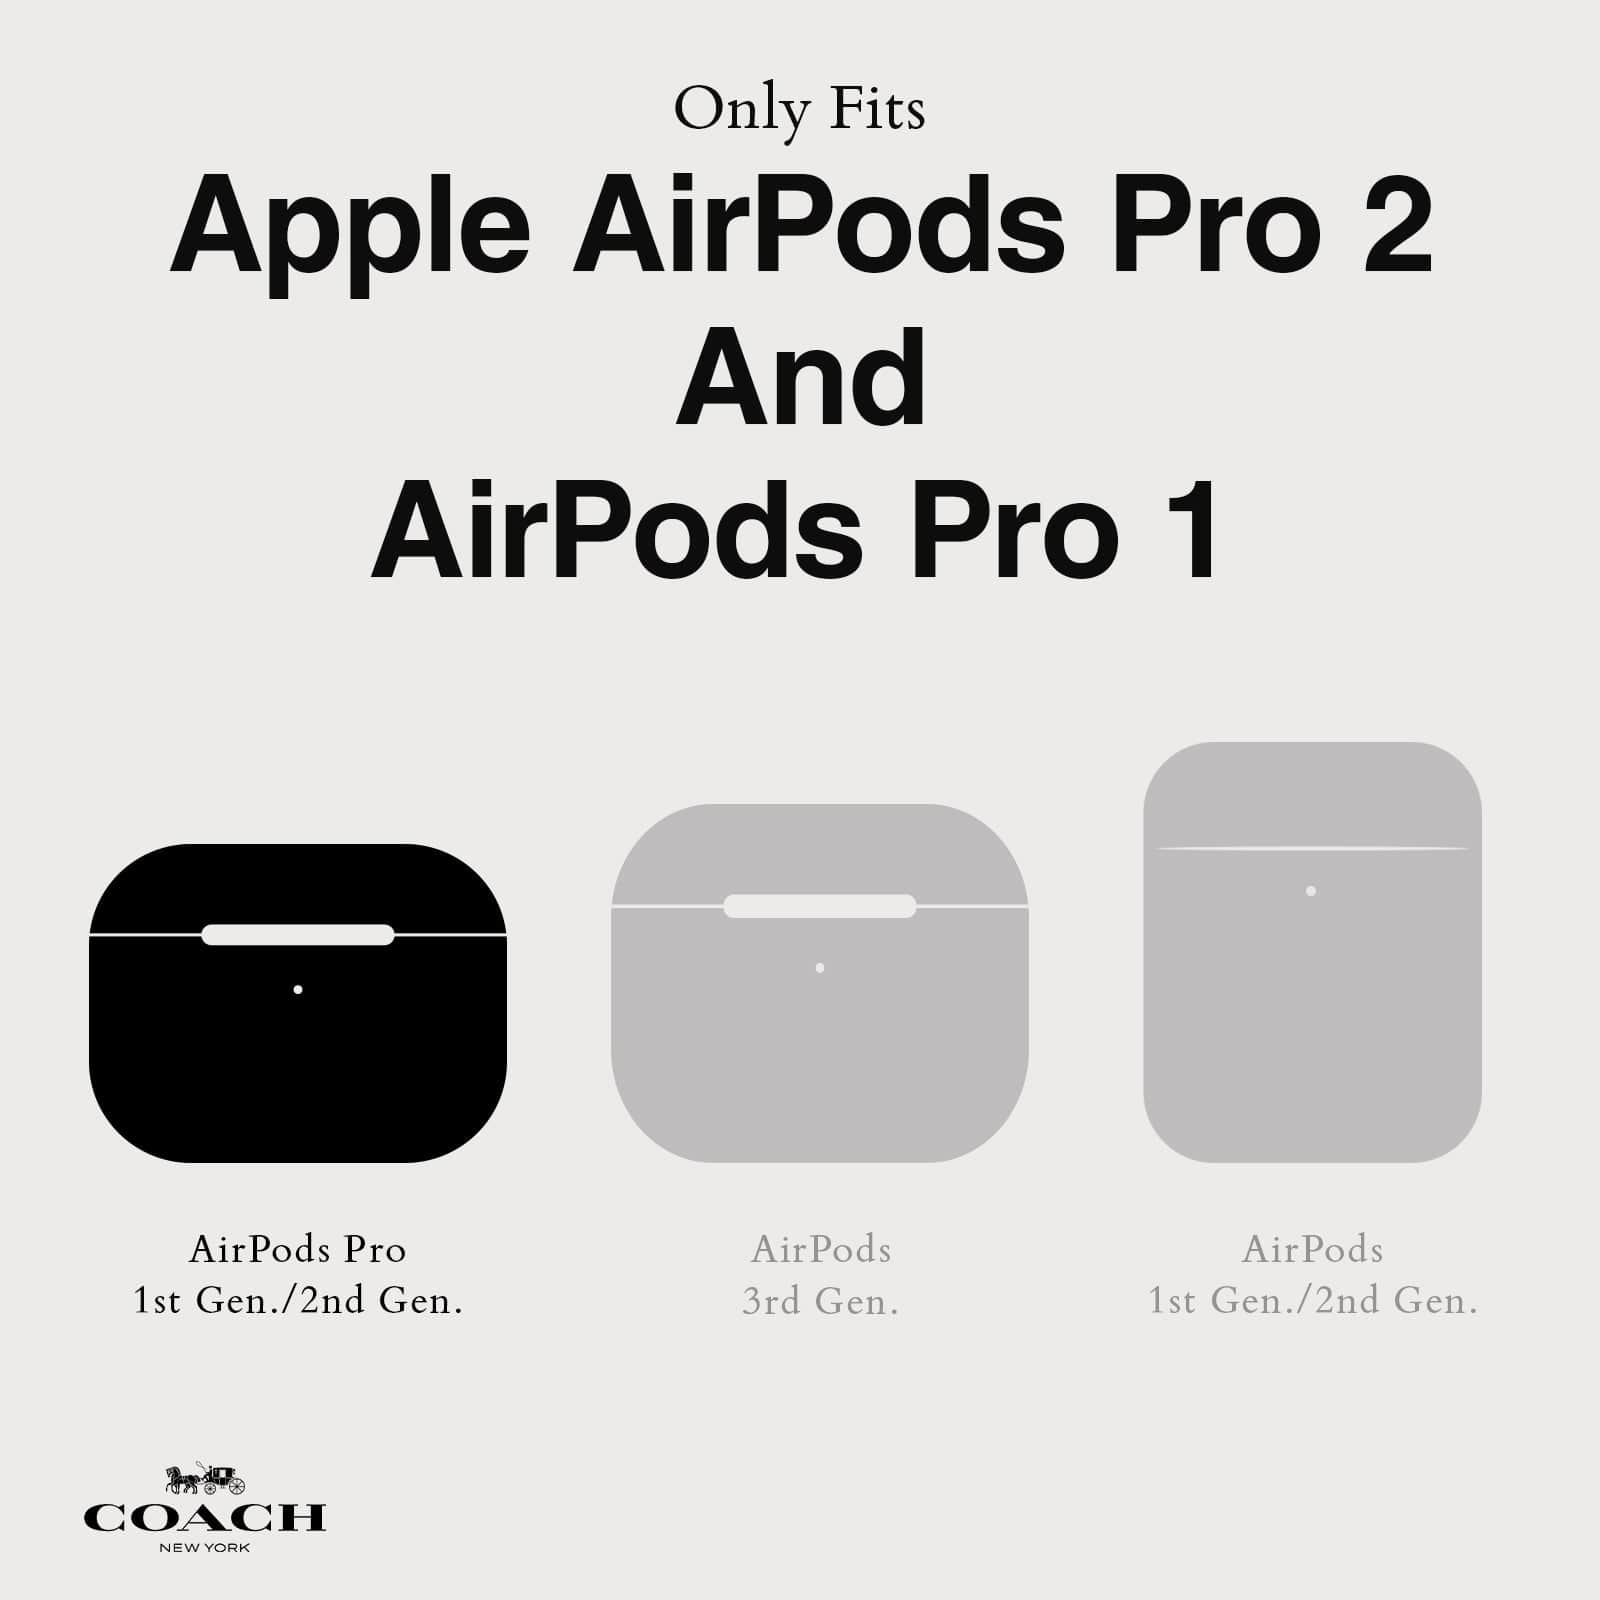 ONLY FITS APPLE AIRPODS PRO 2 AND AIRPODS PRO 1